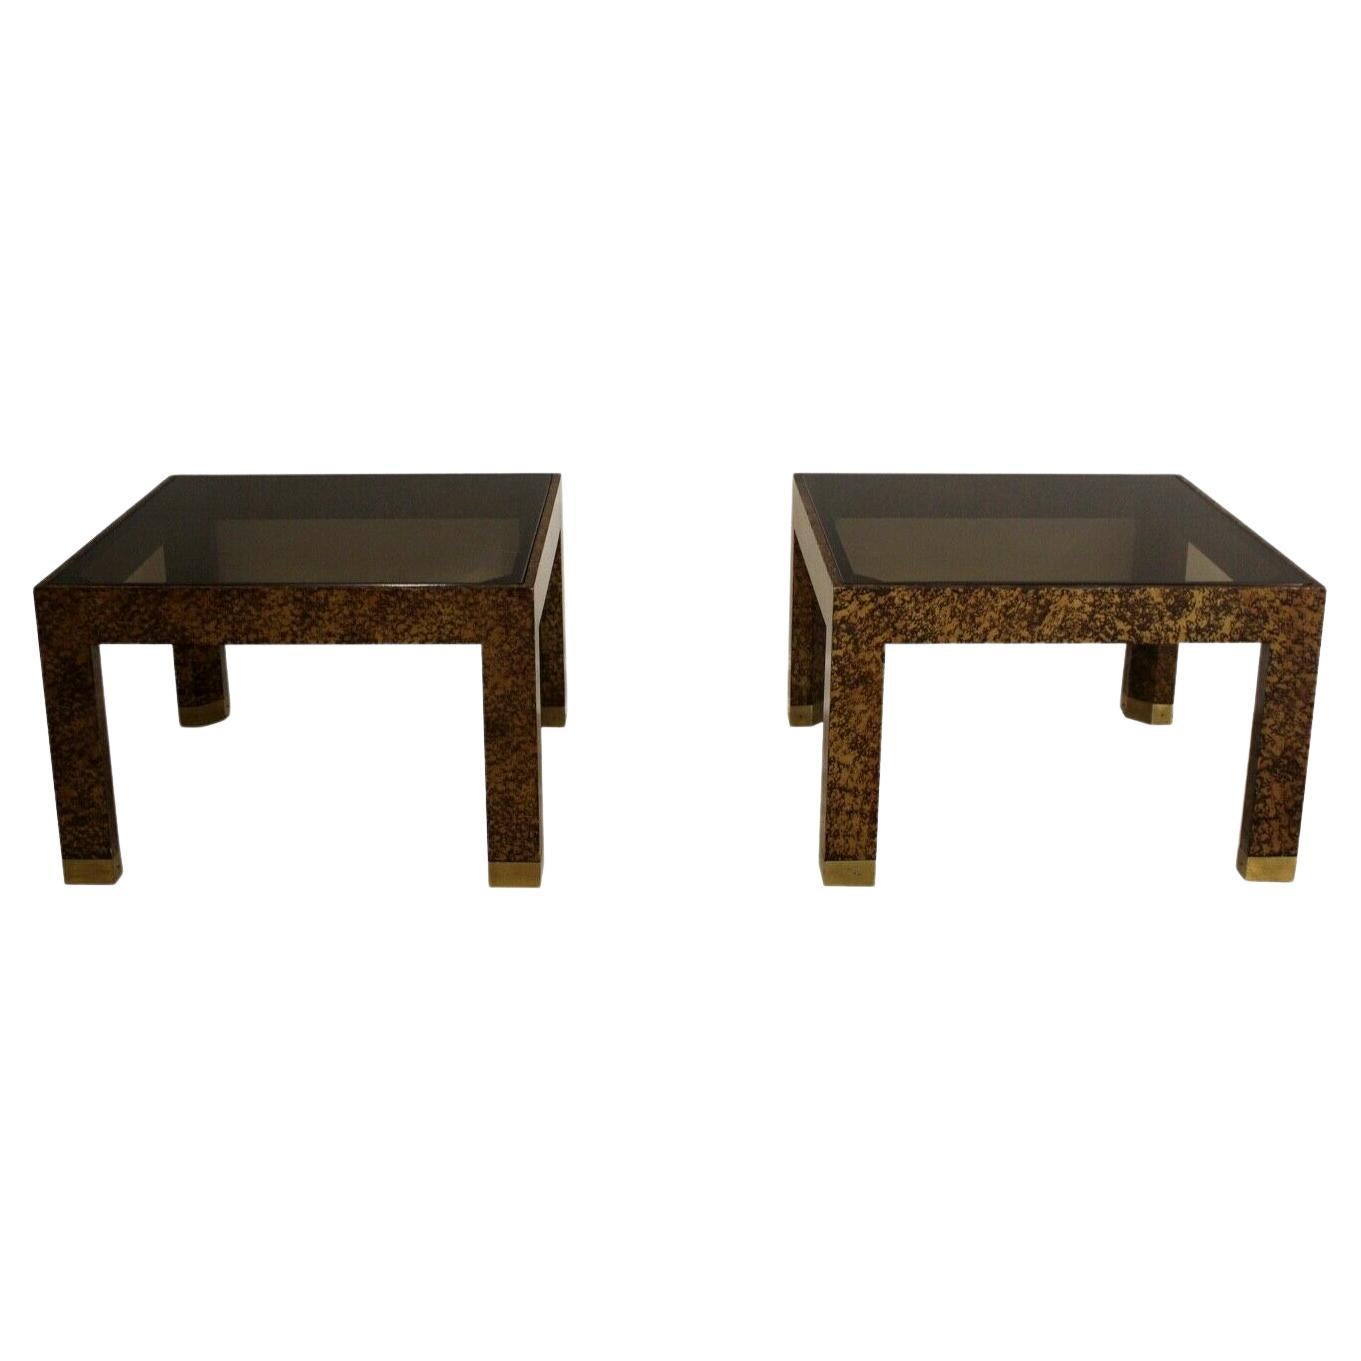 Henredon Faux Tortoise Shell Smoked Glass Pair of End Tables with Brass Feet